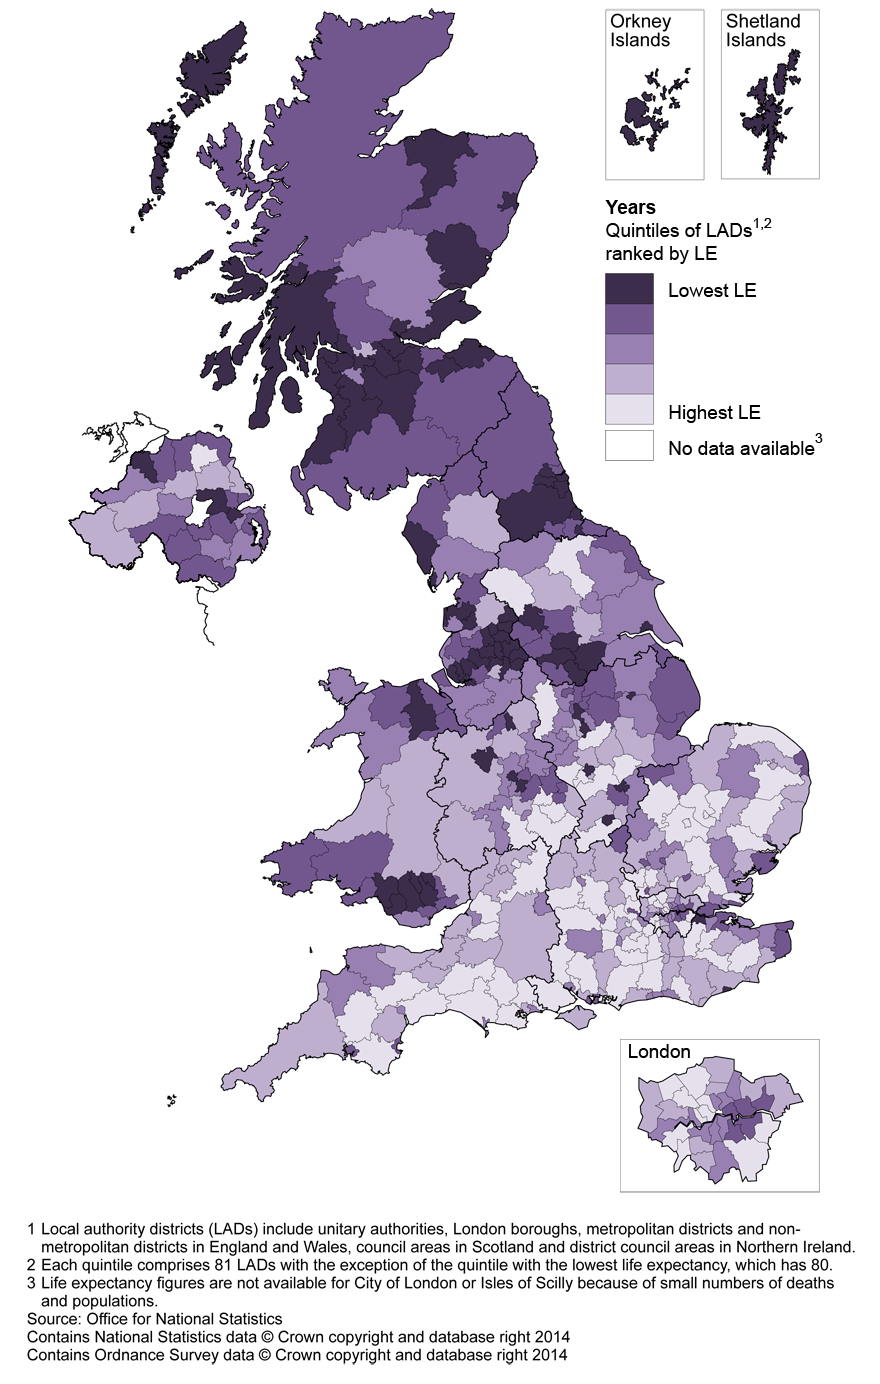 What is the average height in the United Kingdom?